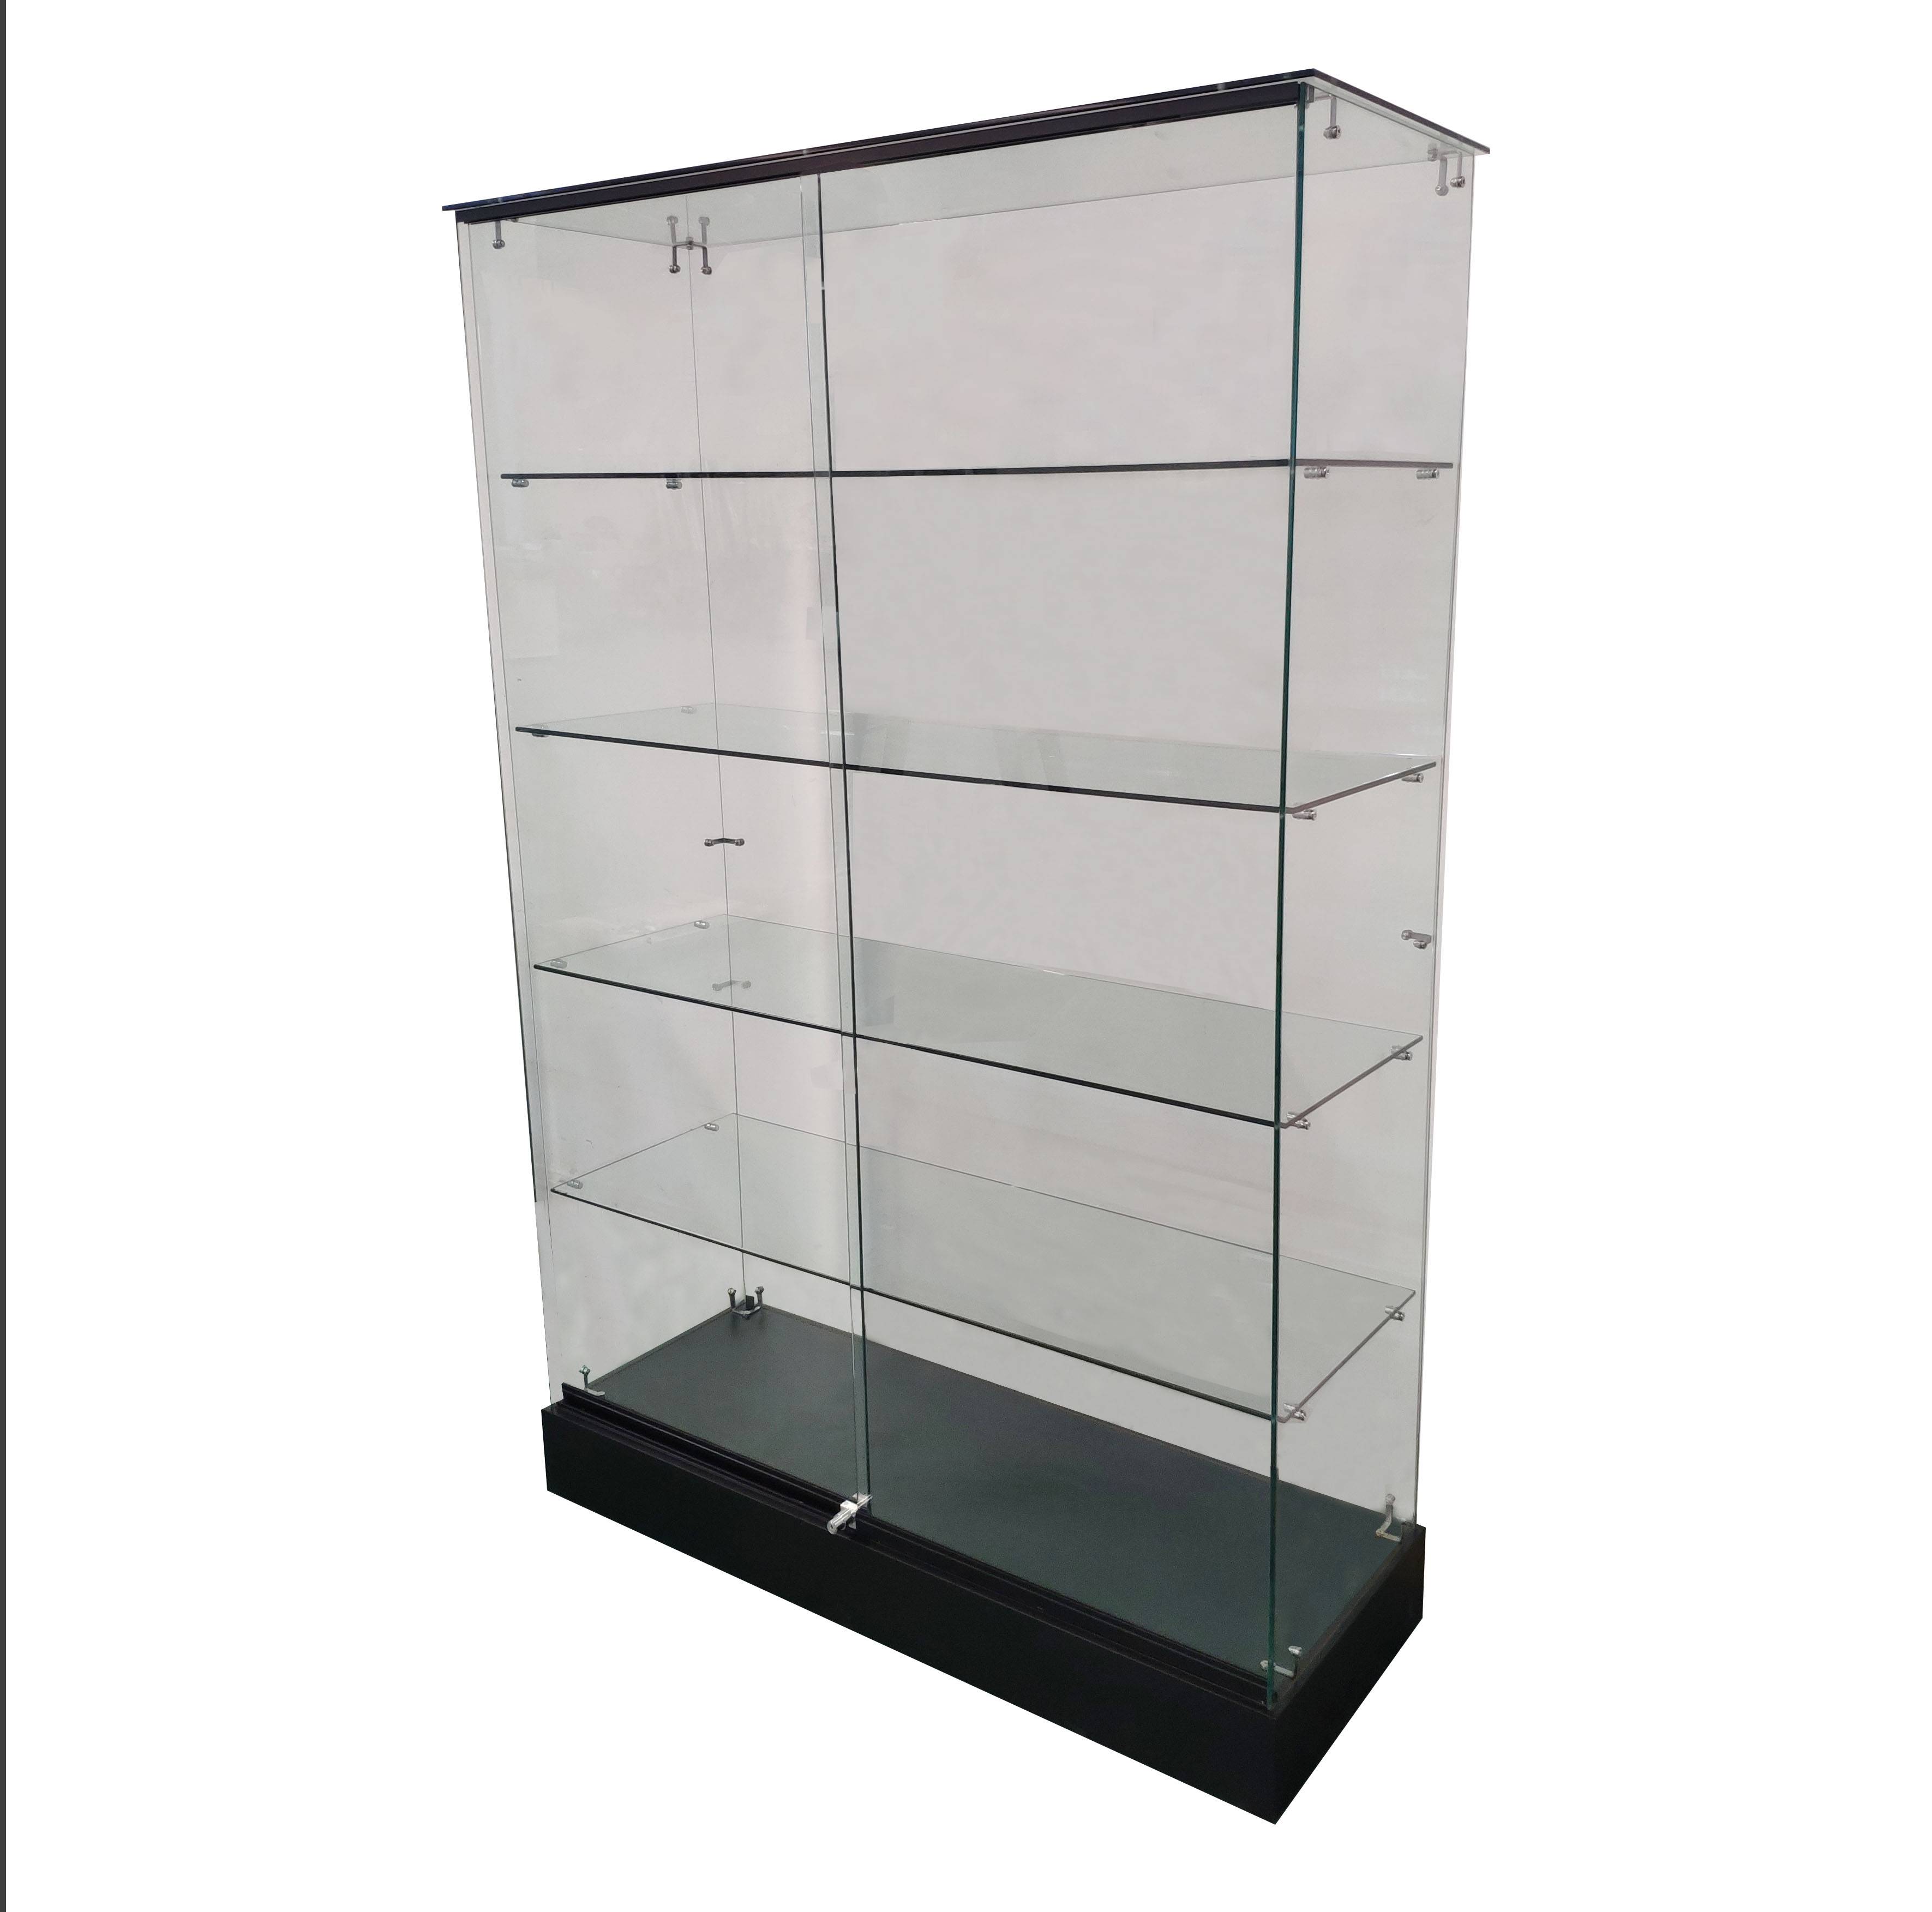 https://www.oyeshowcases.com/custom-display-cases-for-collectibles-with-80mm-base-including-adjustable-feet-oye-product/